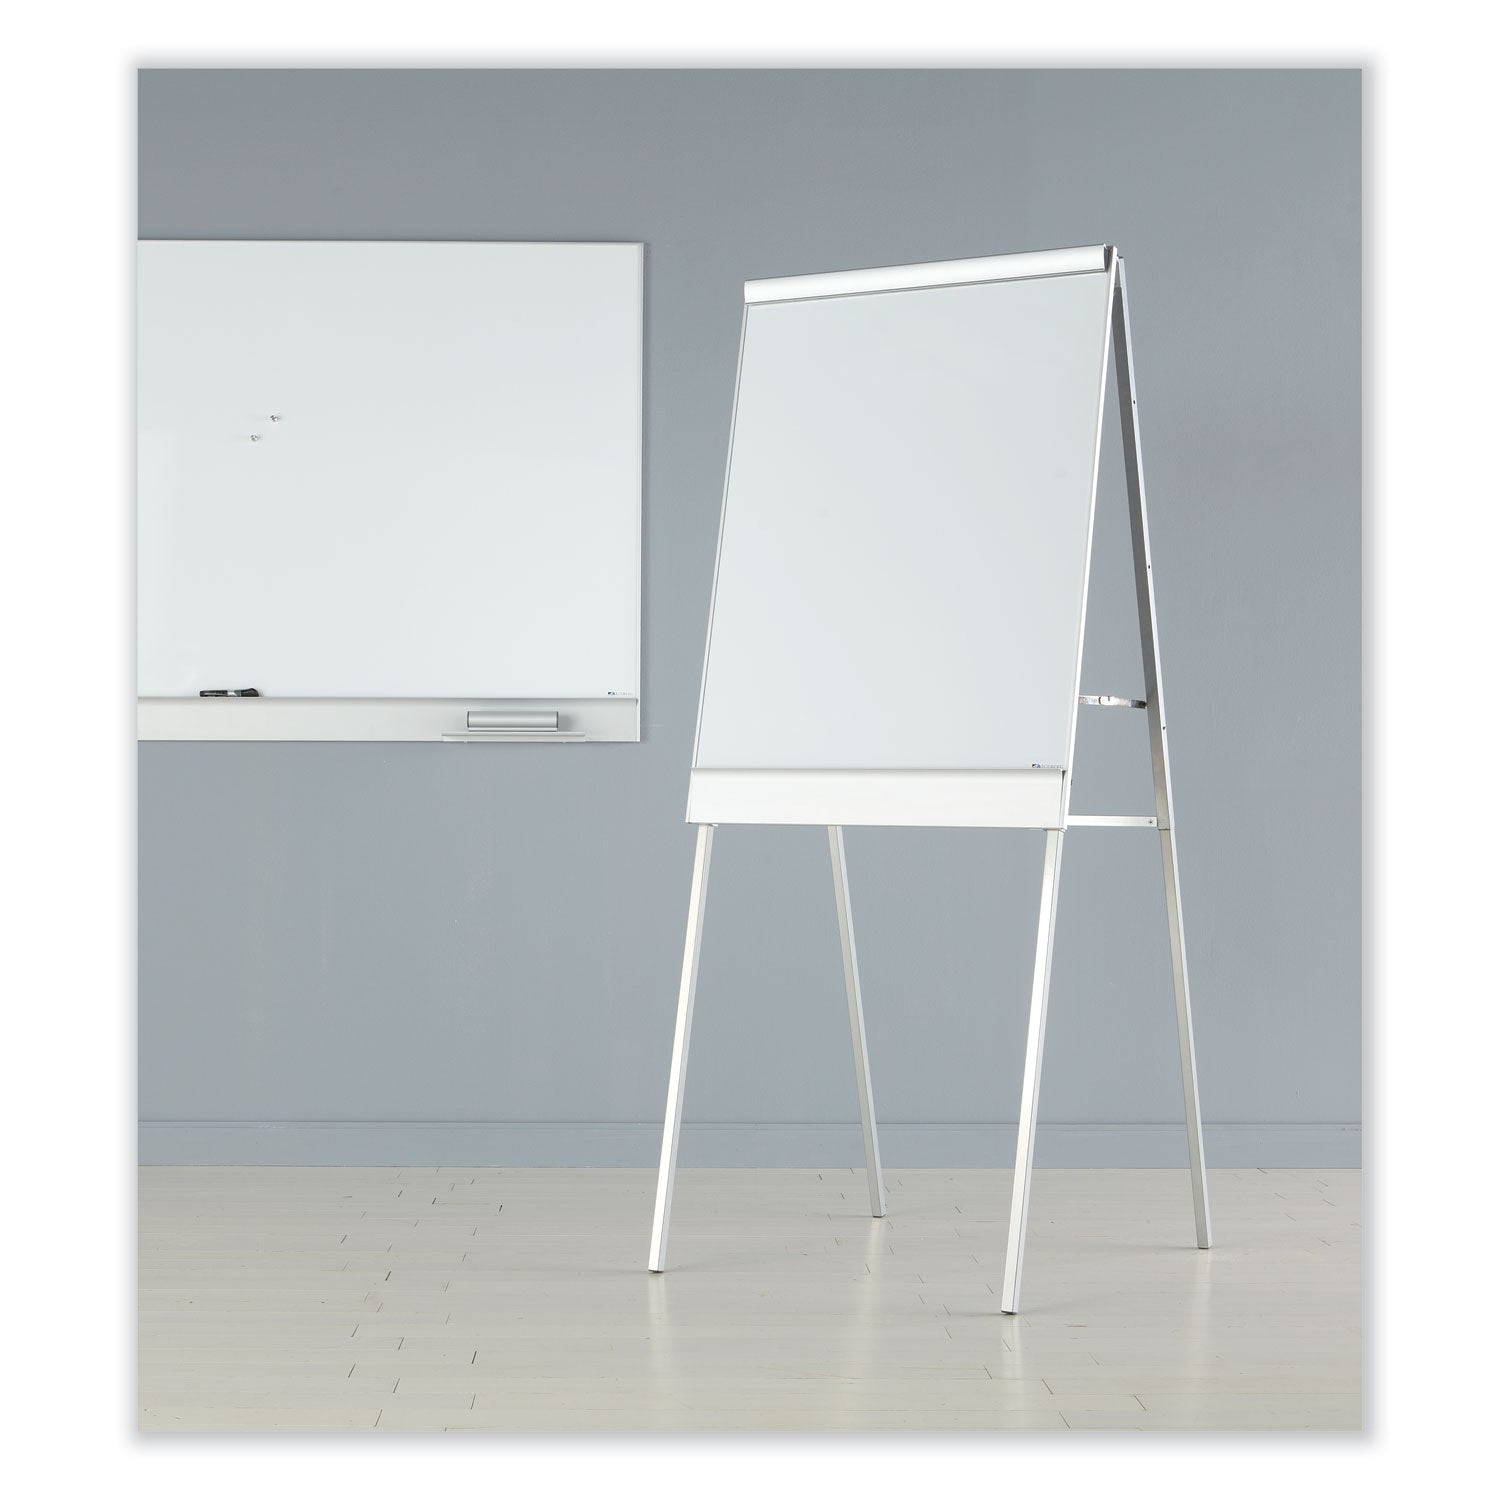 polarity-height-adjustable-dry-erase-flipchart-easel-30-x-20-31-x-50-74-easel-30-x-38-board-white-surface-silver-frame_ice30333 - 3